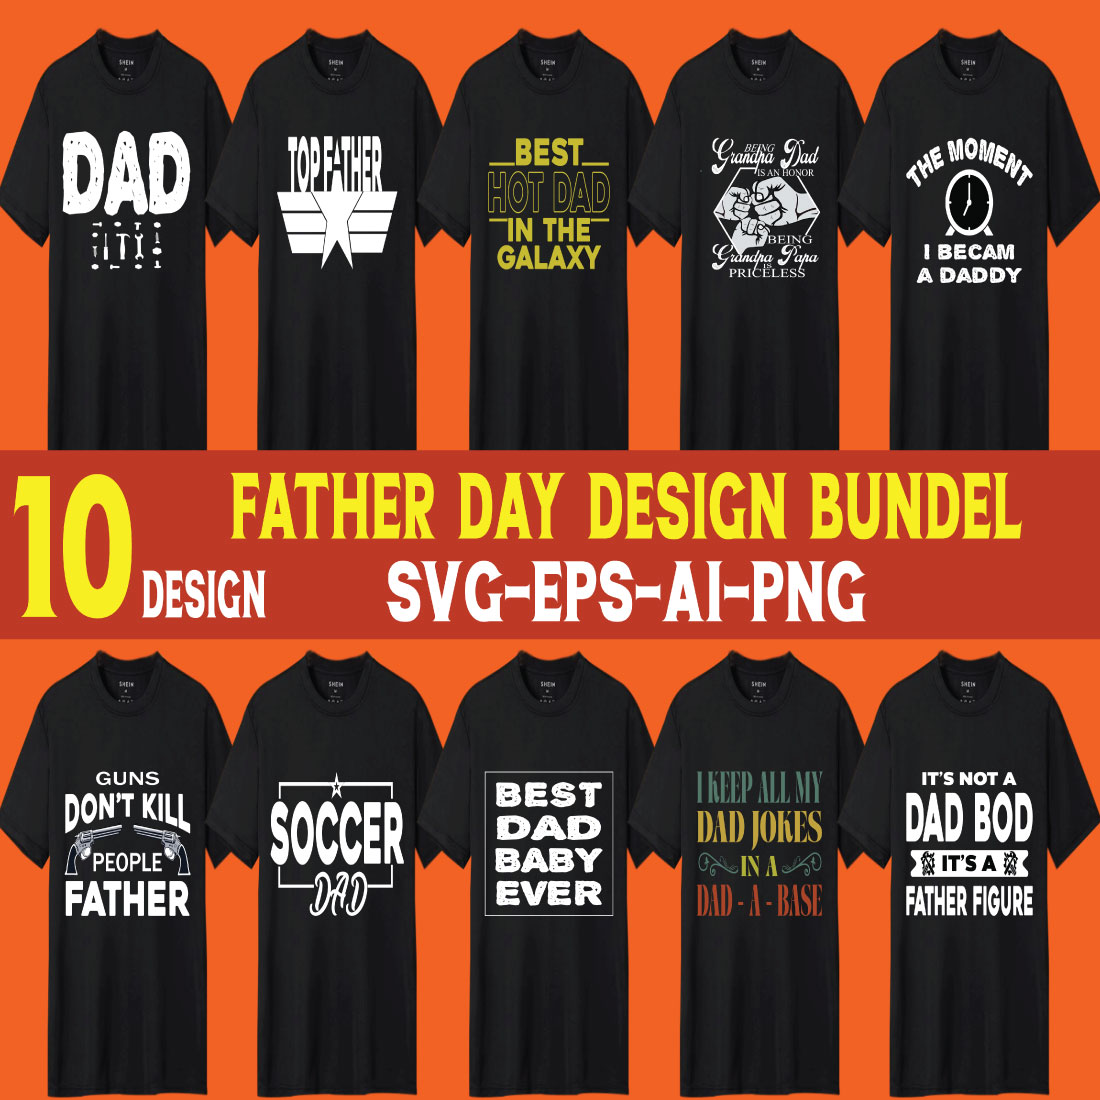 This is Father's Day T-shirt Design cover image.